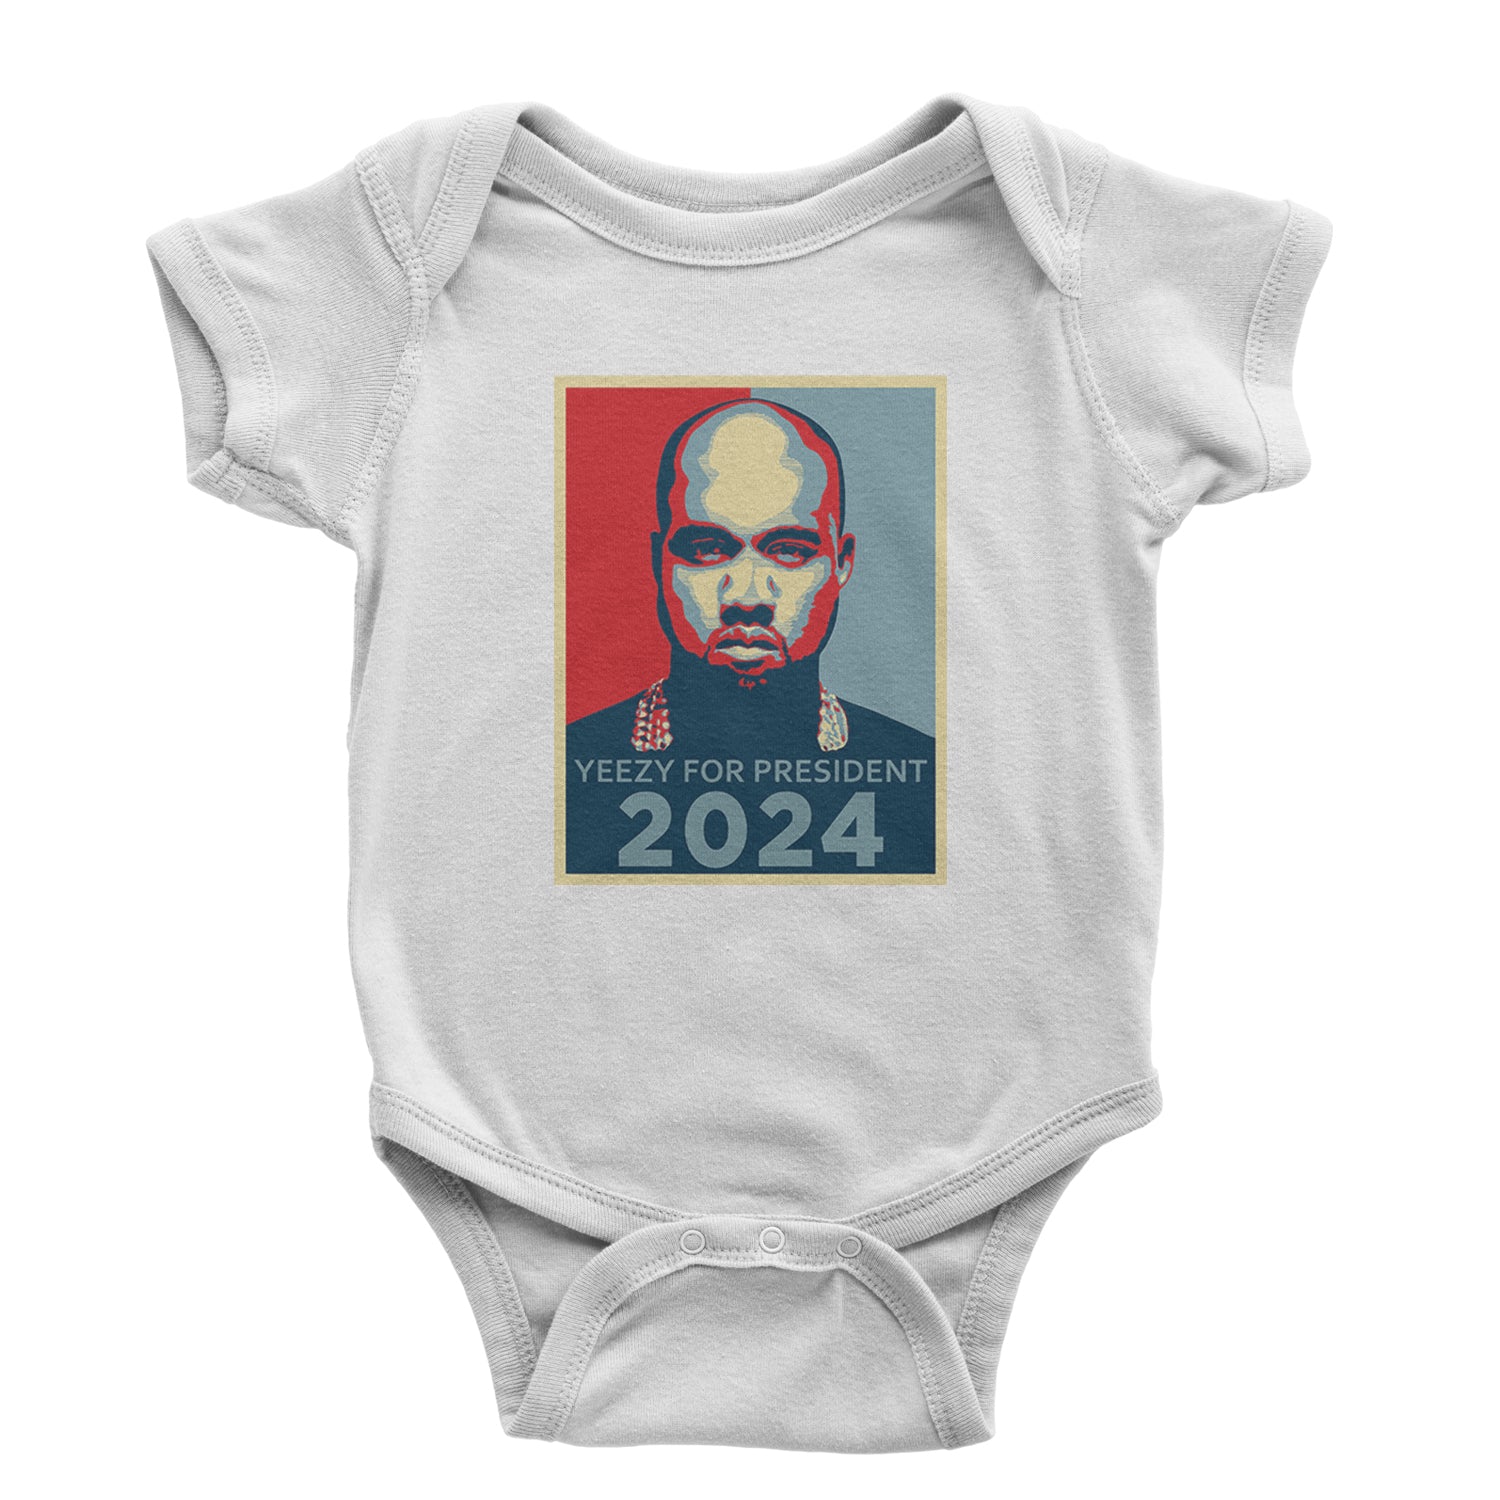 Yeezus For President Vote for Ye Infant One-Piece Romper Bodysuit and Toddler T-shirt White